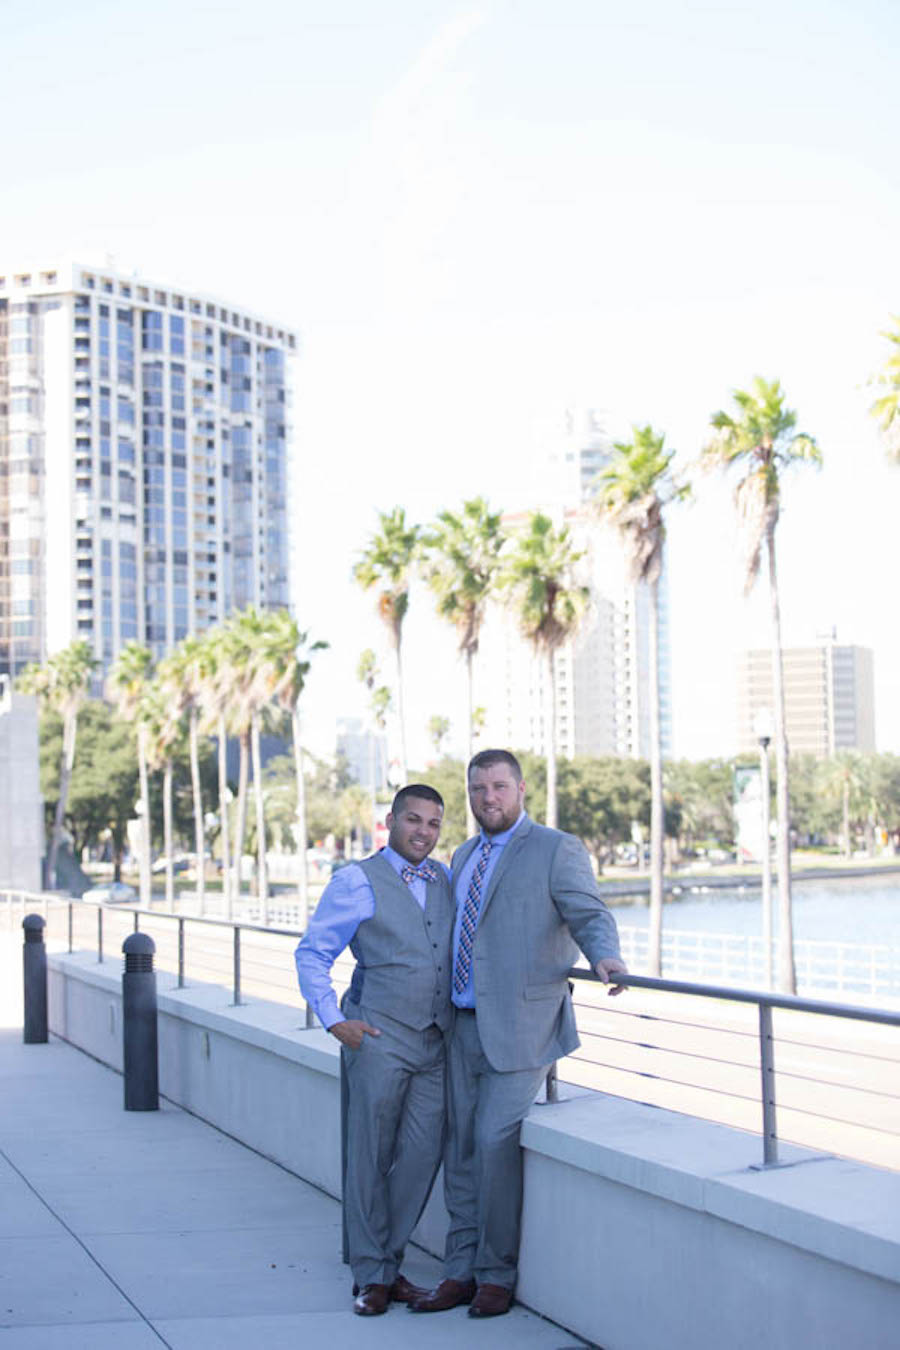 Same Sex Outdoor Wedding Portrait With Grooms In Grey Suits | St. Pete Wedding Photographer Lisa Otto Photography